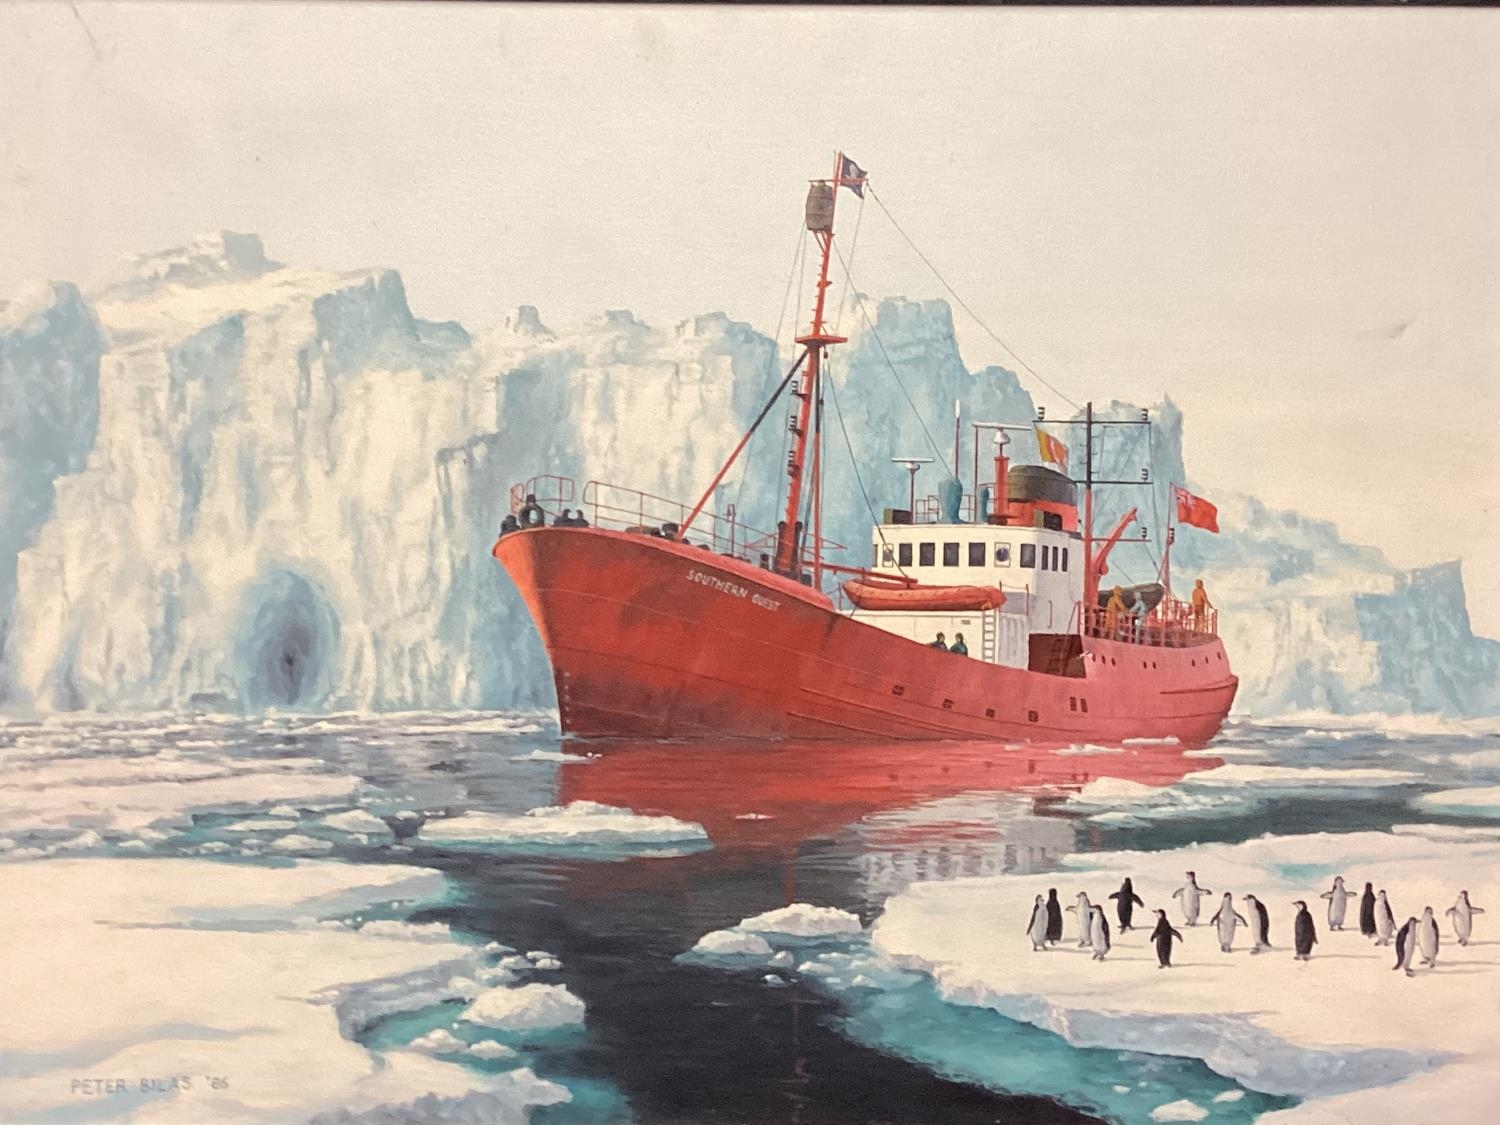 PETER BILAS, 1952,Acrylic on Canvas, of an Antarctic Nautical scene, signed and dated lower left - Image 3 of 8